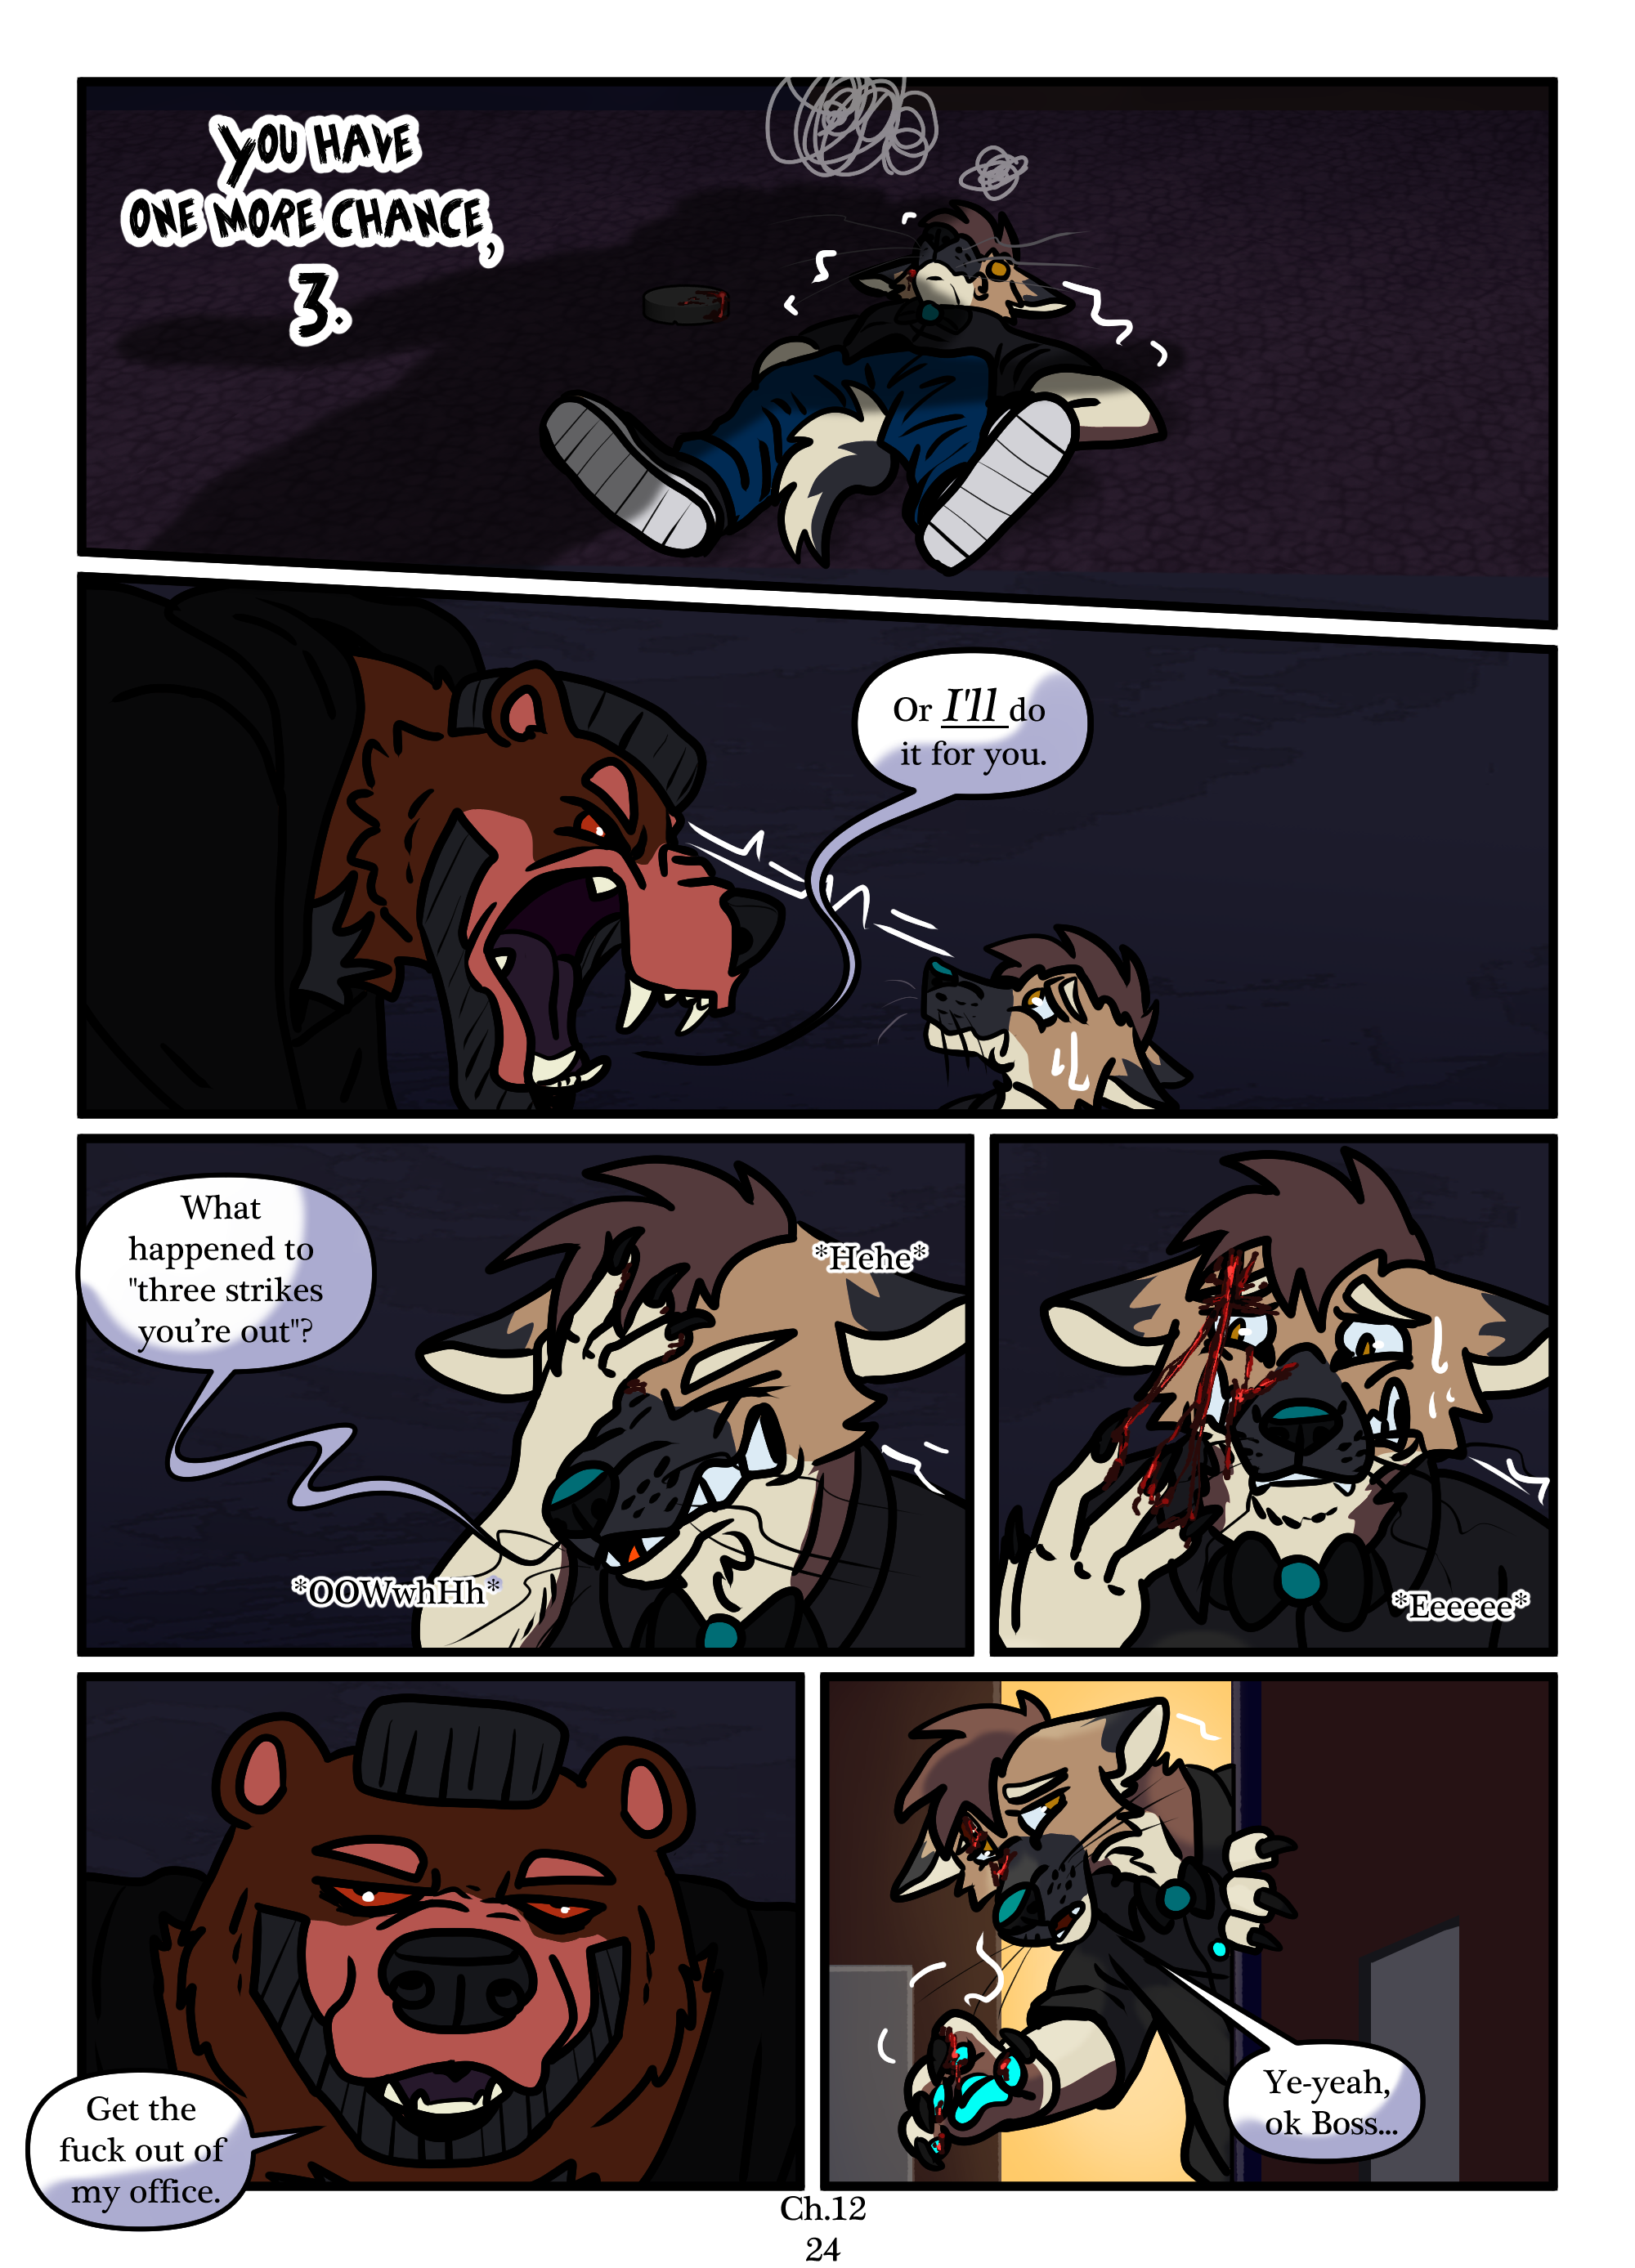 Ch.12 page 24